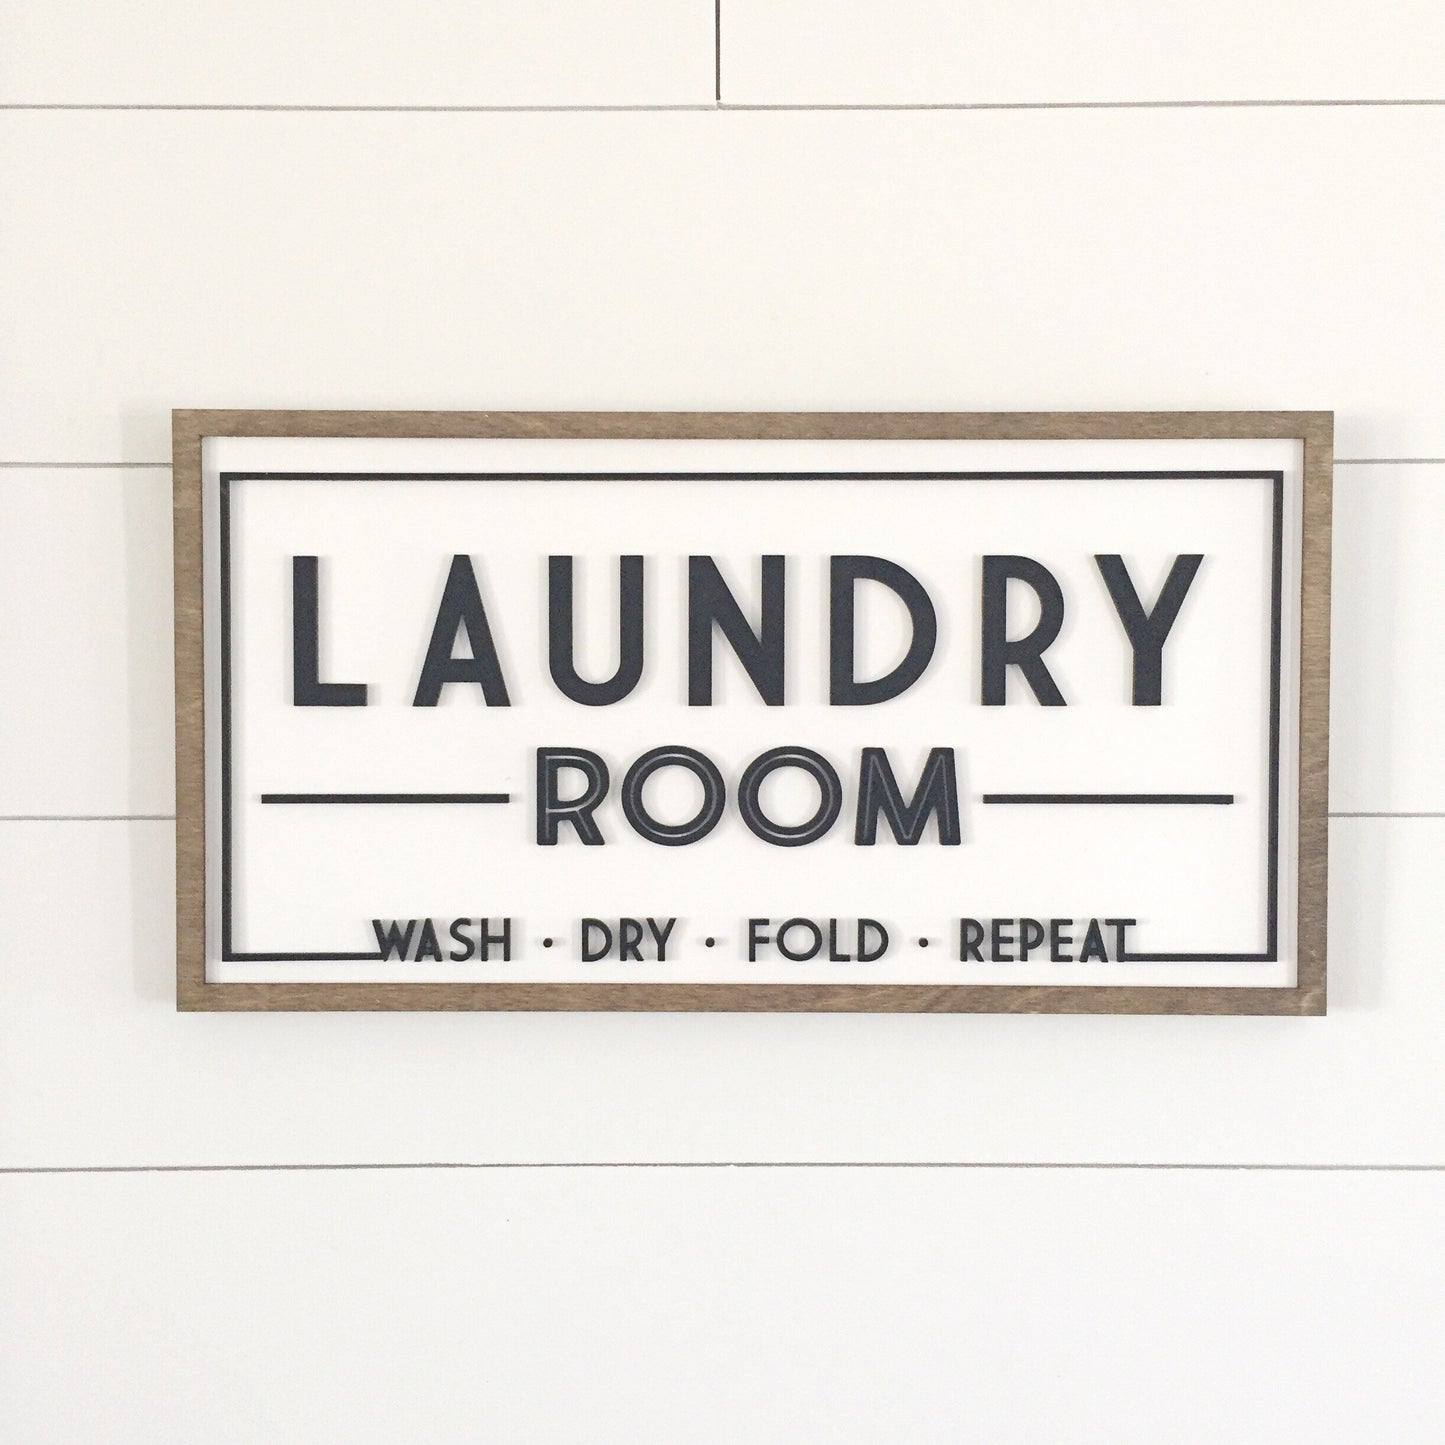 Laundry Room | 11x21 inch Wood Framed Sign | 3D Lettering